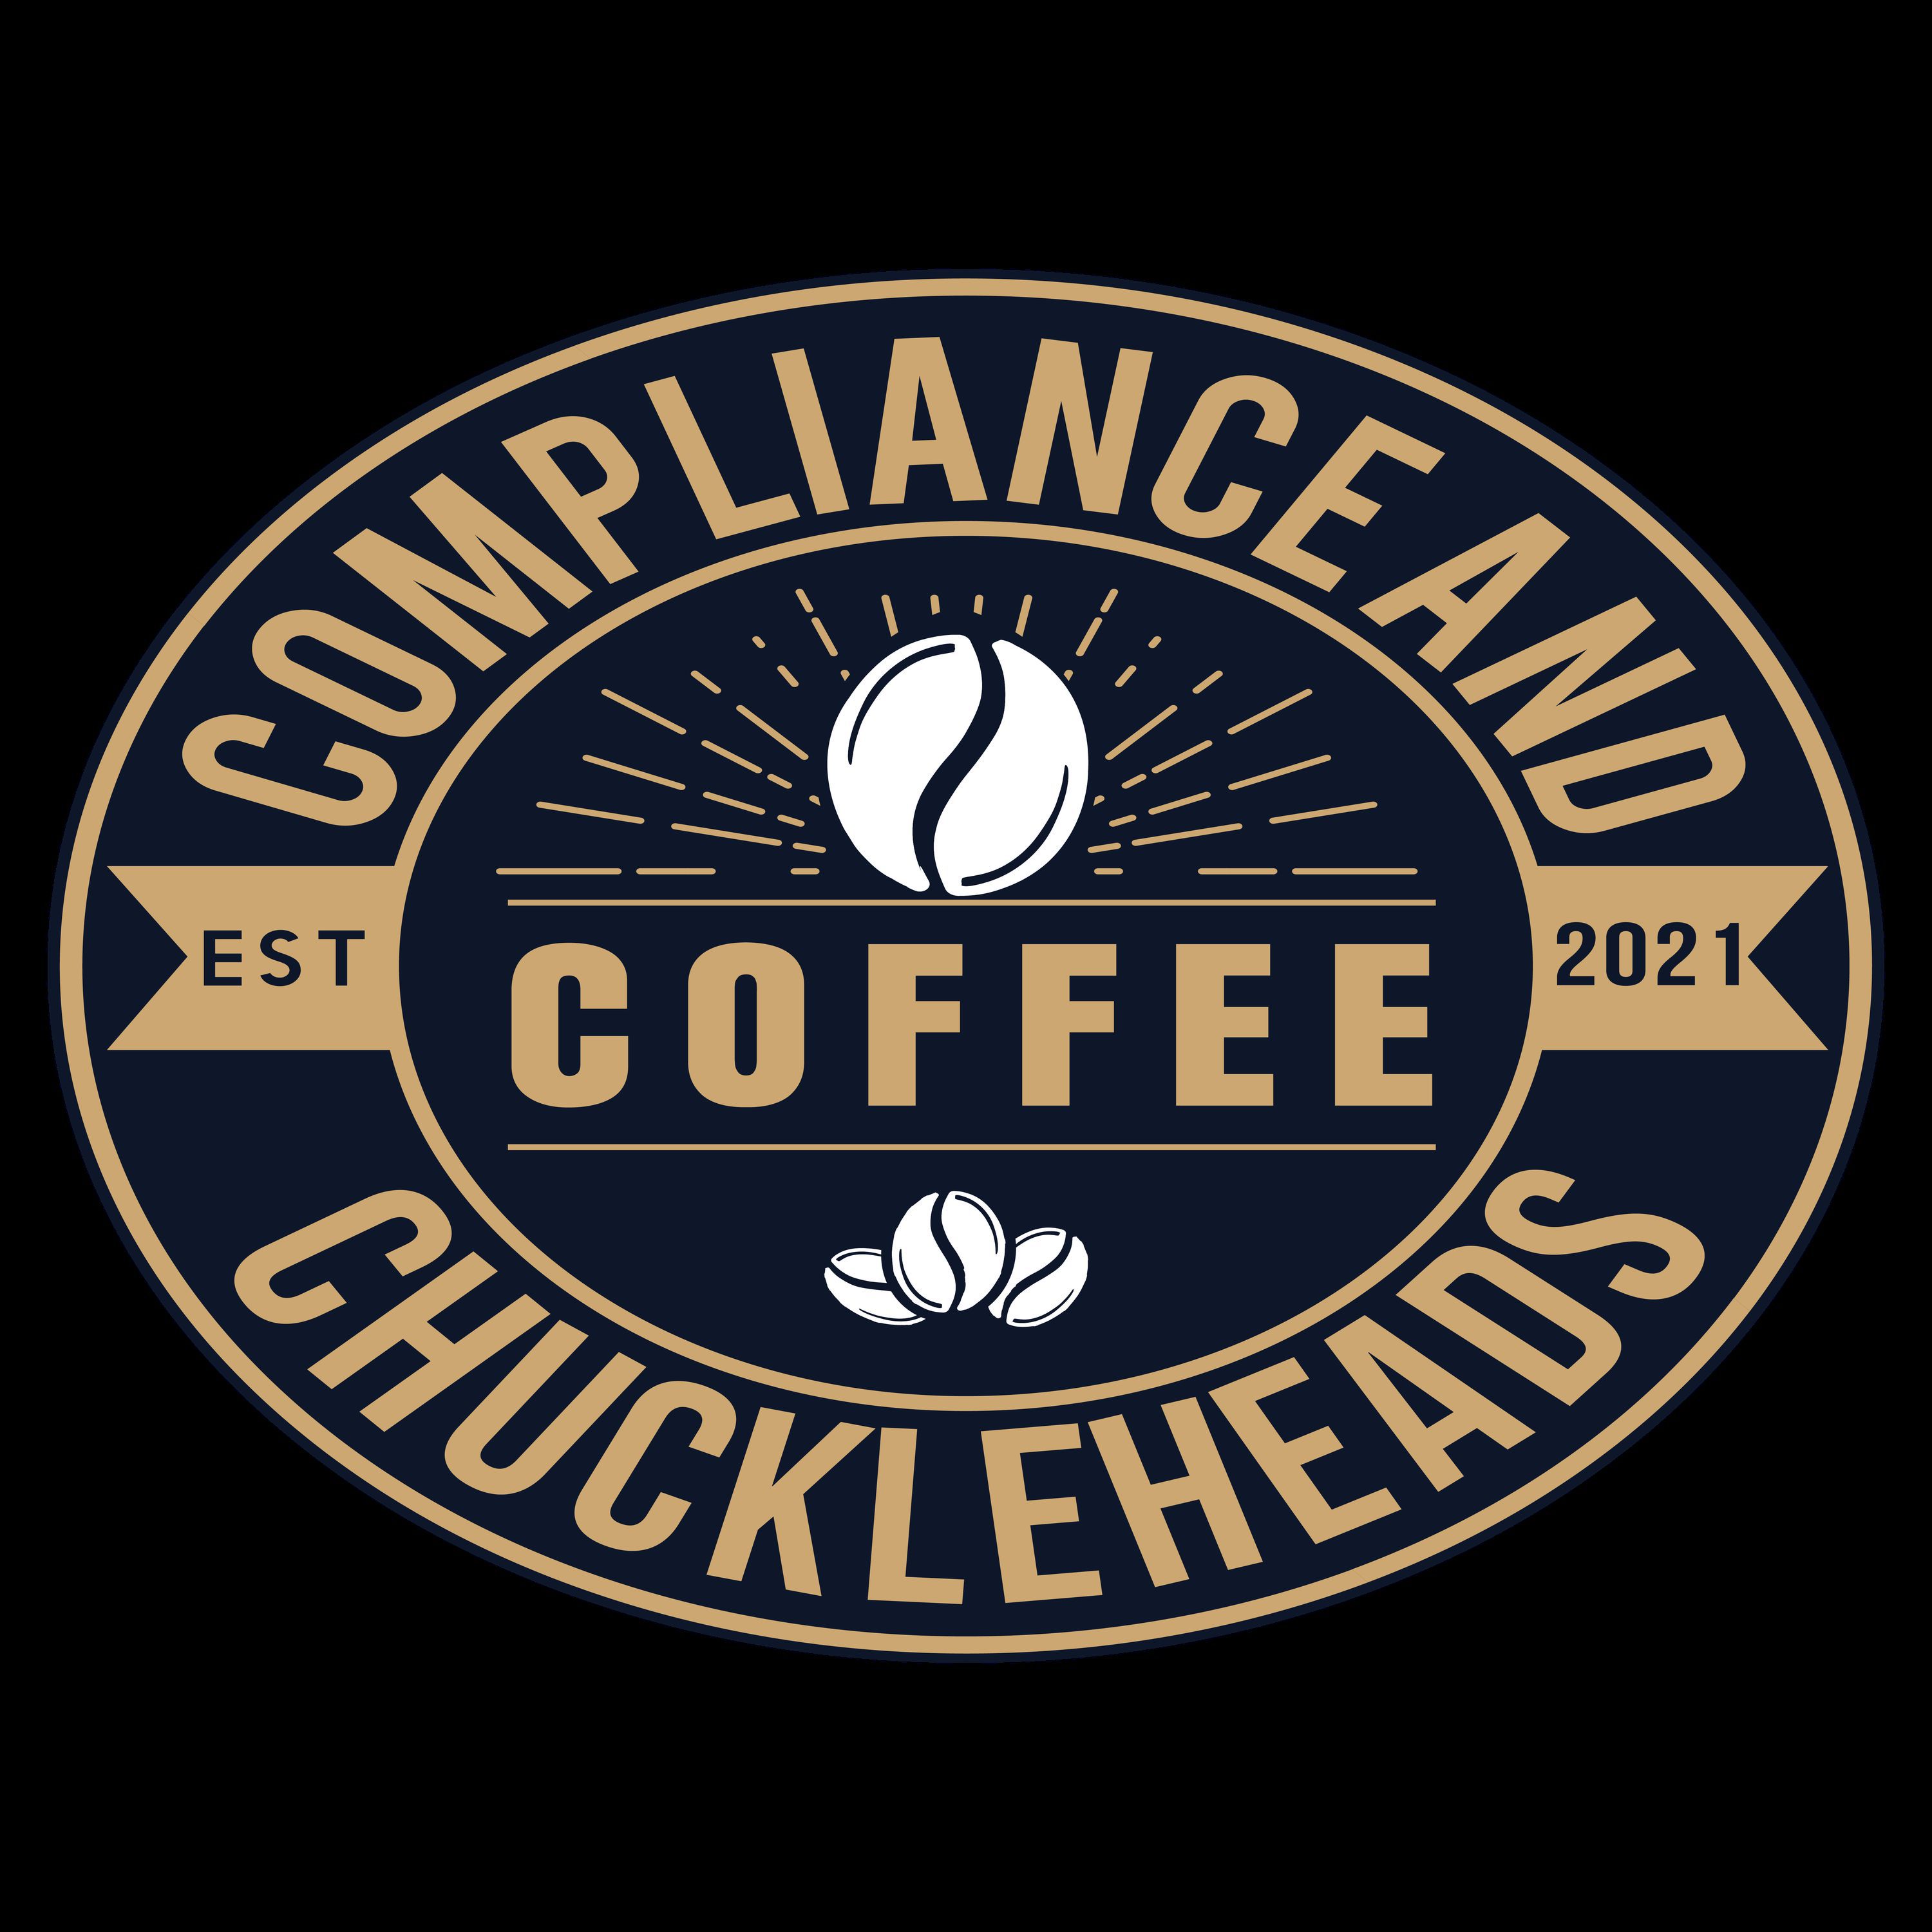 Coffee, Compliance and Chuckleheads